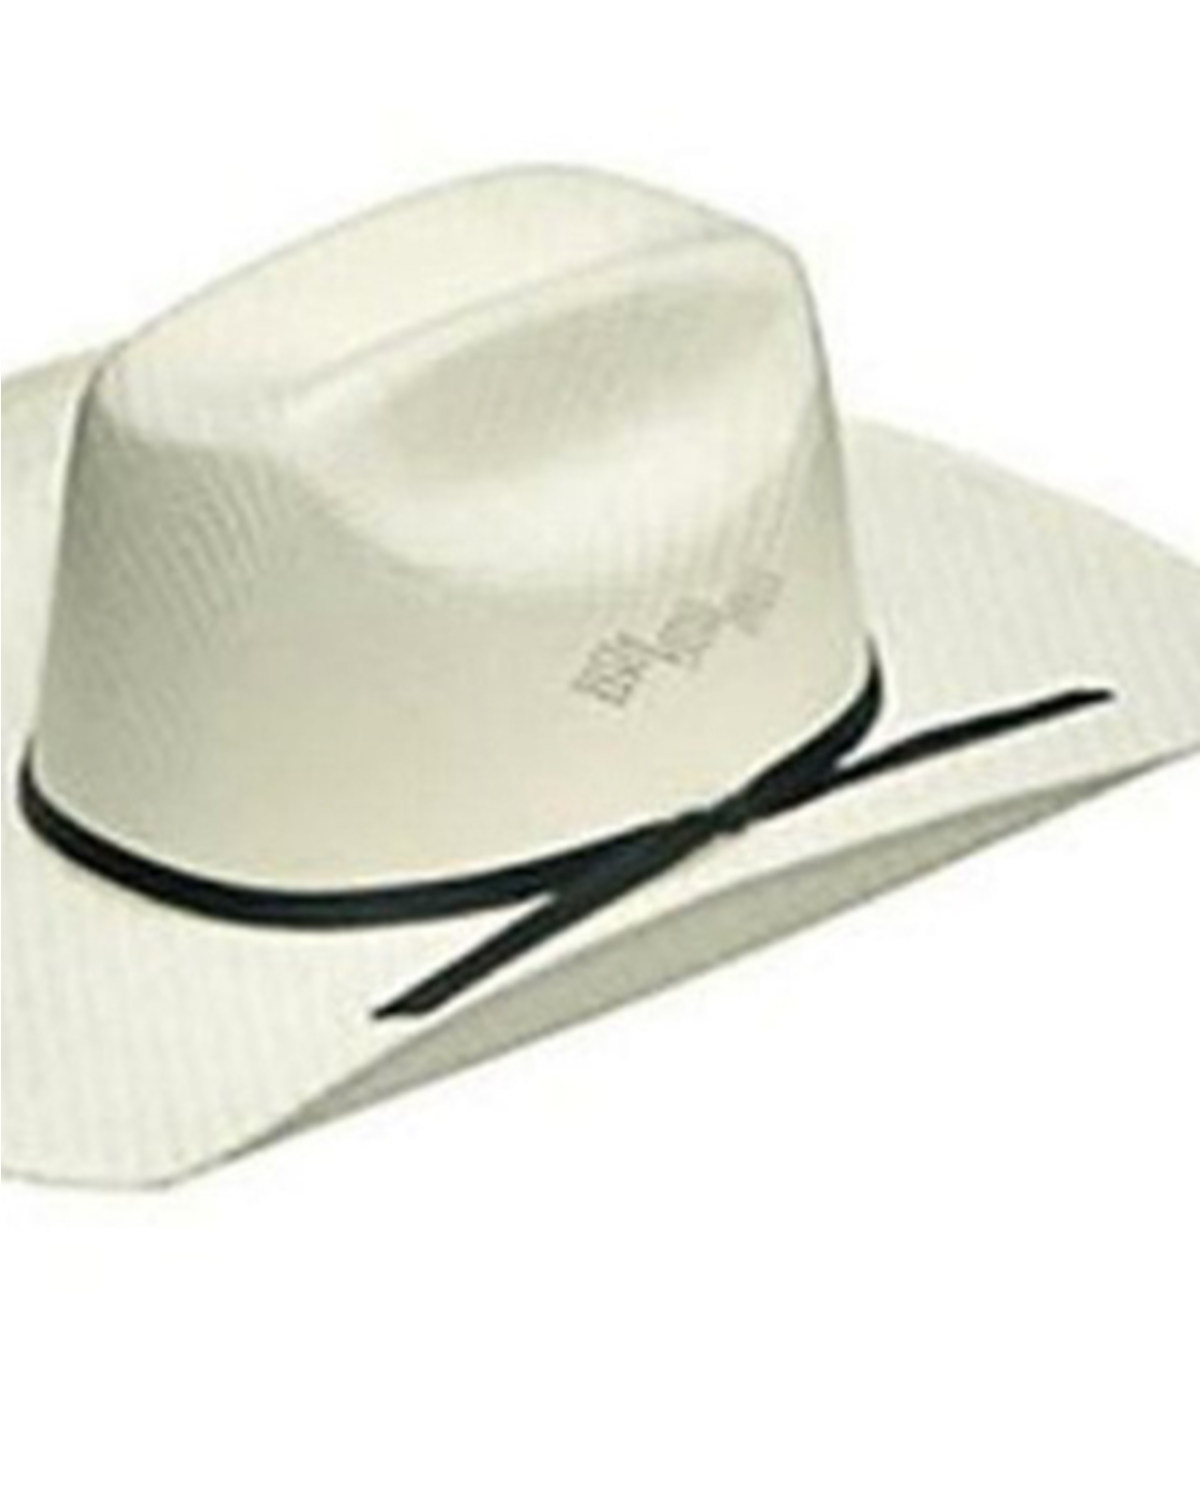 M & F Western Infant Natural Straw Hat